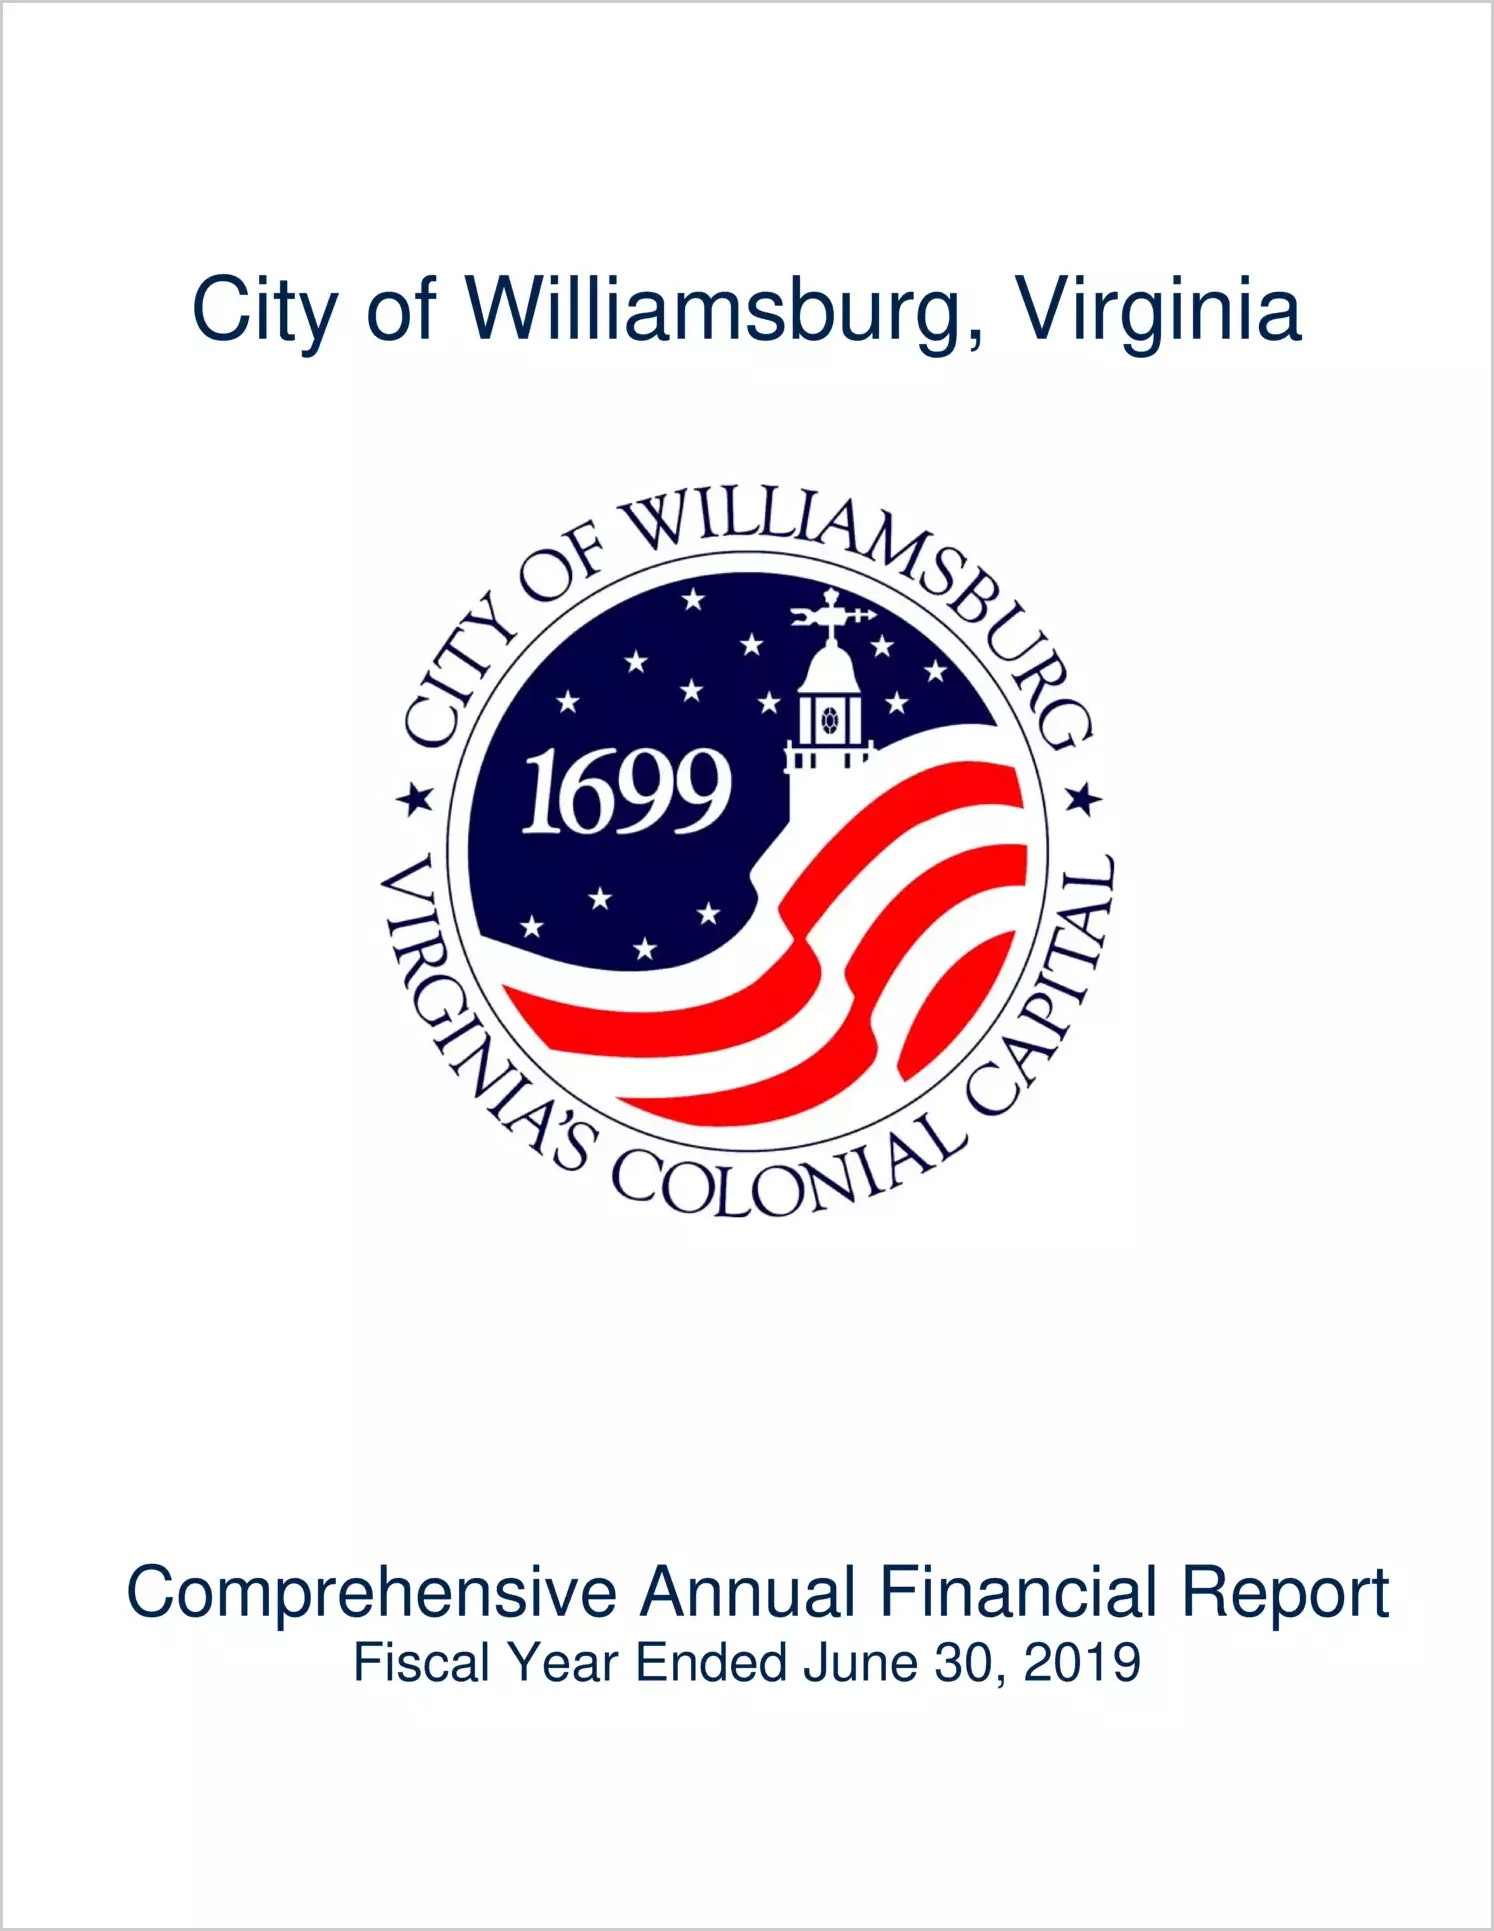 2019 Annual Financial Report for City of Williamsburg